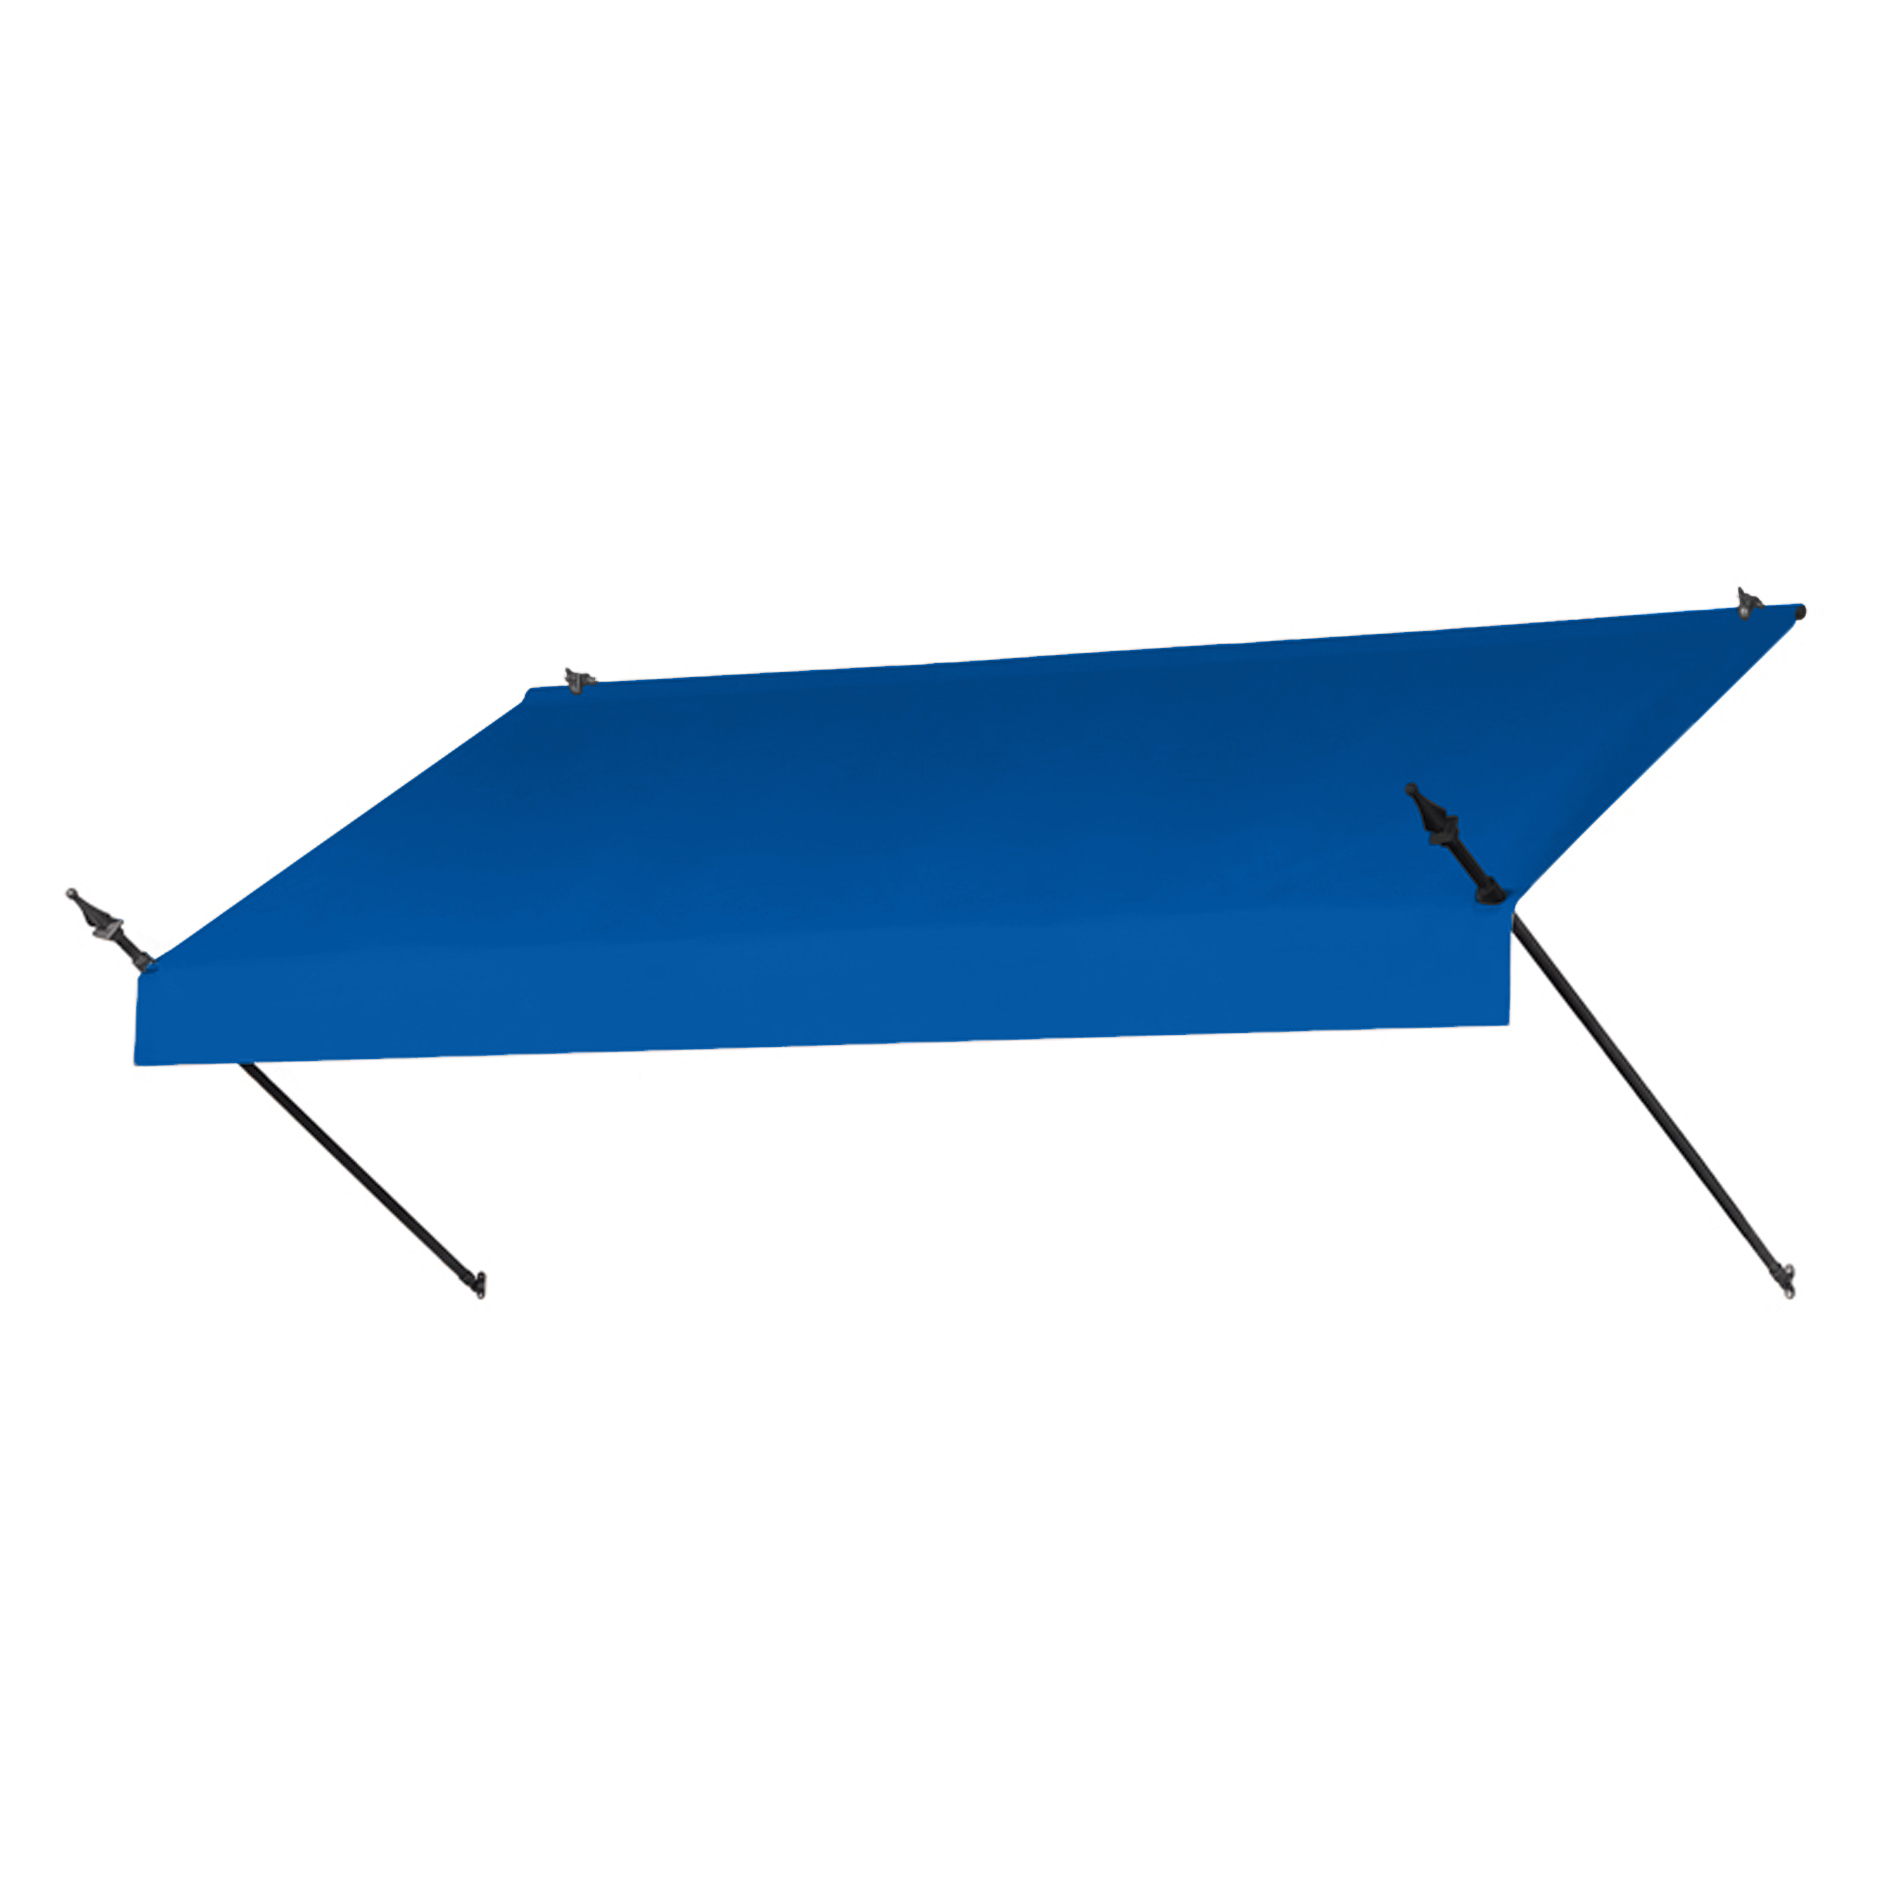 8' Designer Awnings in a Box Pacific Blue